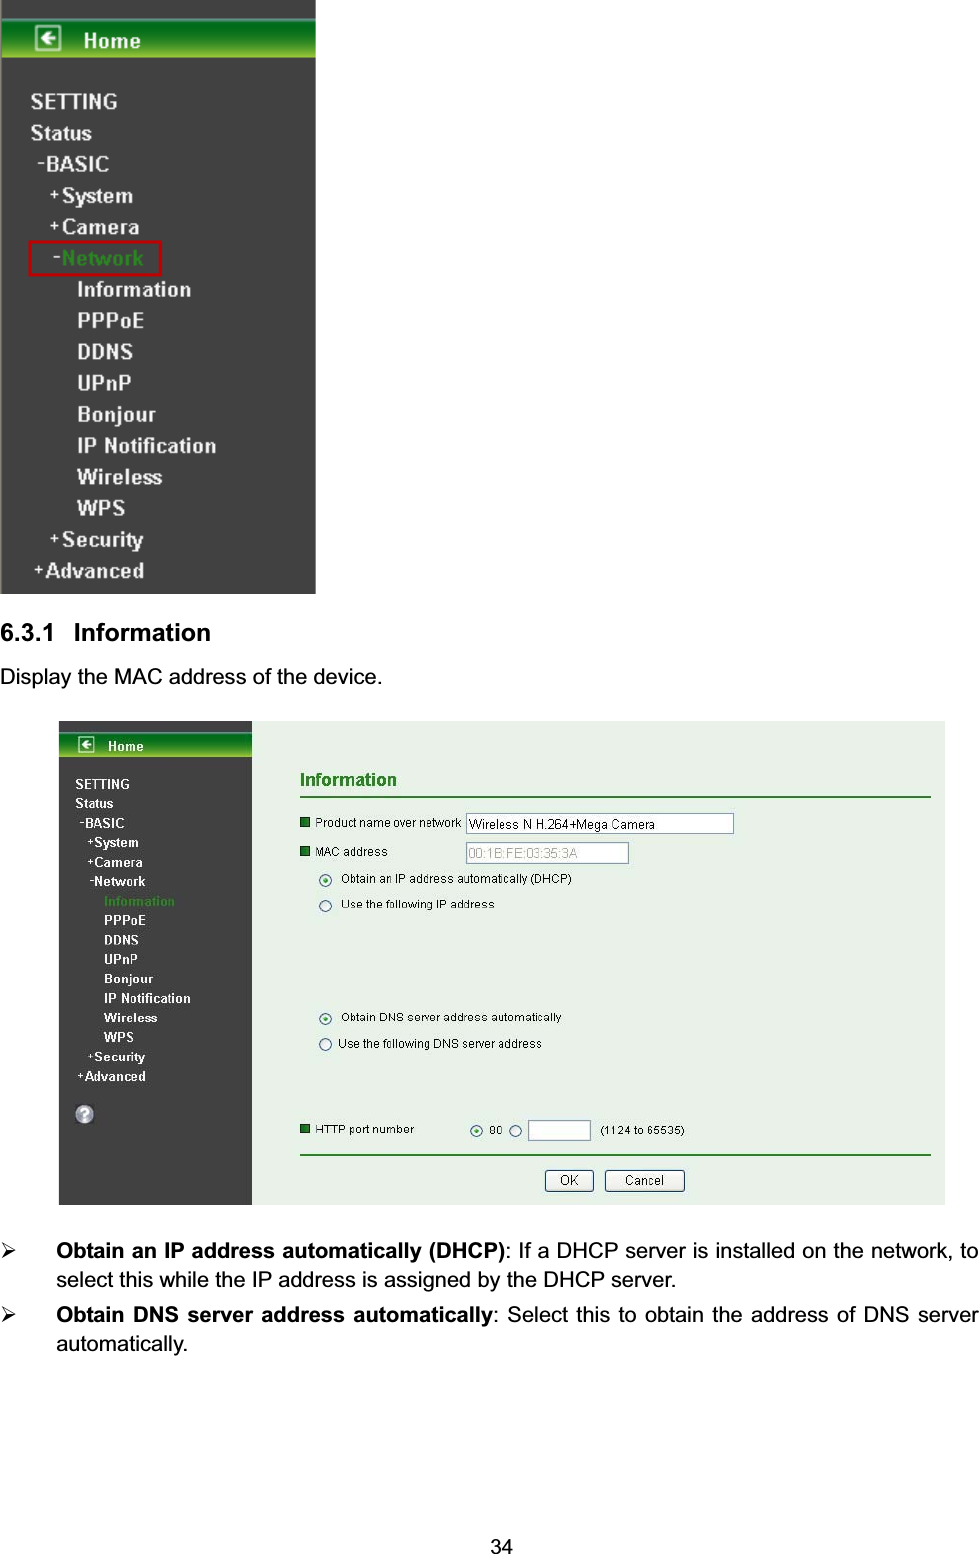   34 6.3.1 Information Display the MAC address of the device.  ¾ Obtain an IP address automatically (DHCP): If a DHCP server is installed on the network, to select this while the IP address is assigned by the DHCP server.   ¾ Obtain DNS server address automatically: Select this to obtain the address of DNS server automatically. 